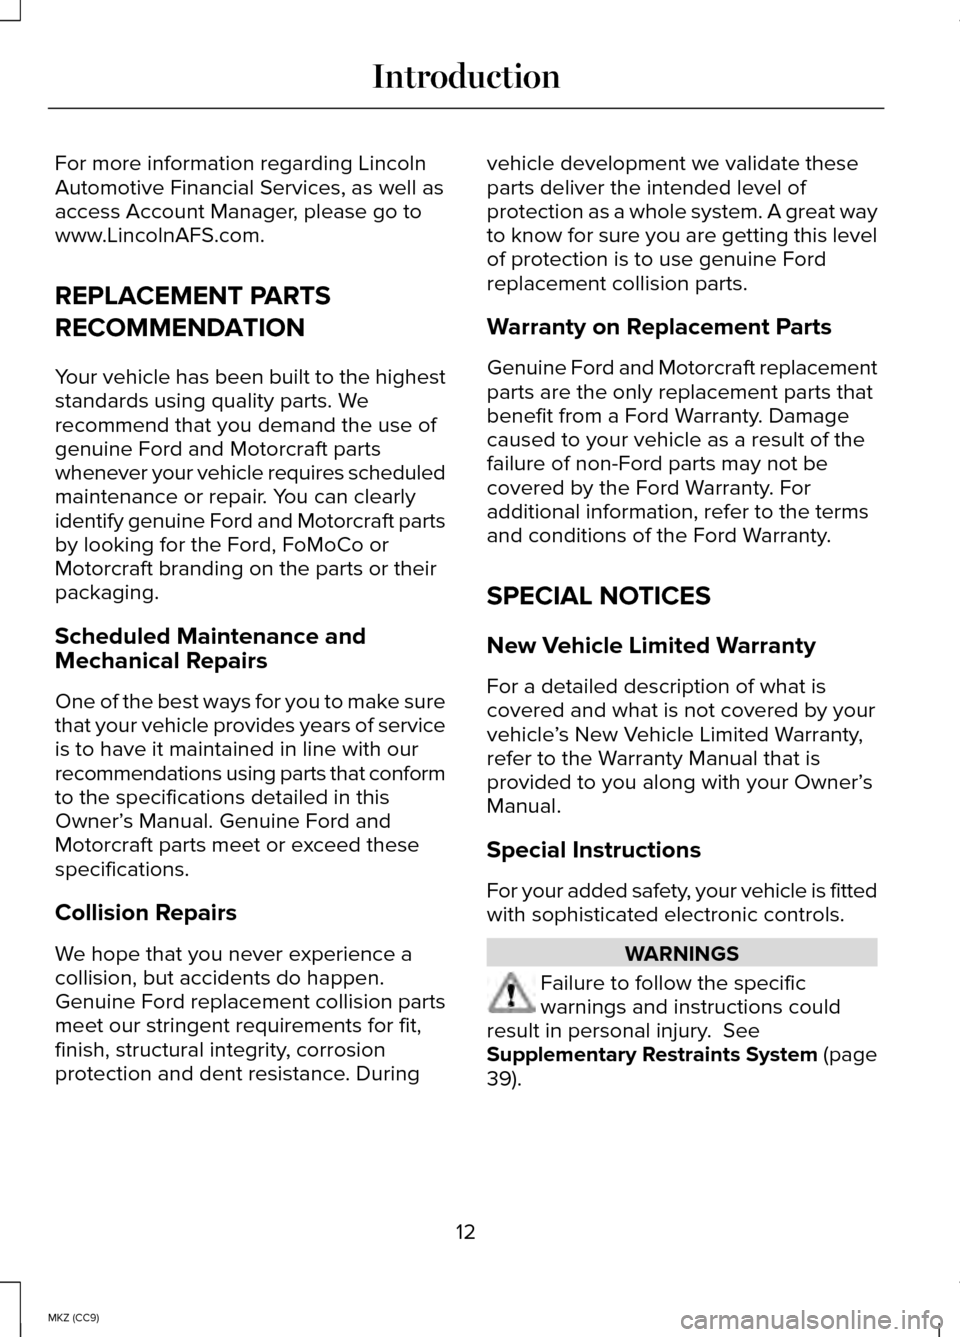 LINCOLN MKZ HYBRID 2014  Owners Manual For more information regarding Lincoln
Automotive Financial Services, as well as
access Account Manager, please go to
www.LincolnAFS.com.
REPLACEMENT PARTS
RECOMMENDATION
Your vehicle has been built t